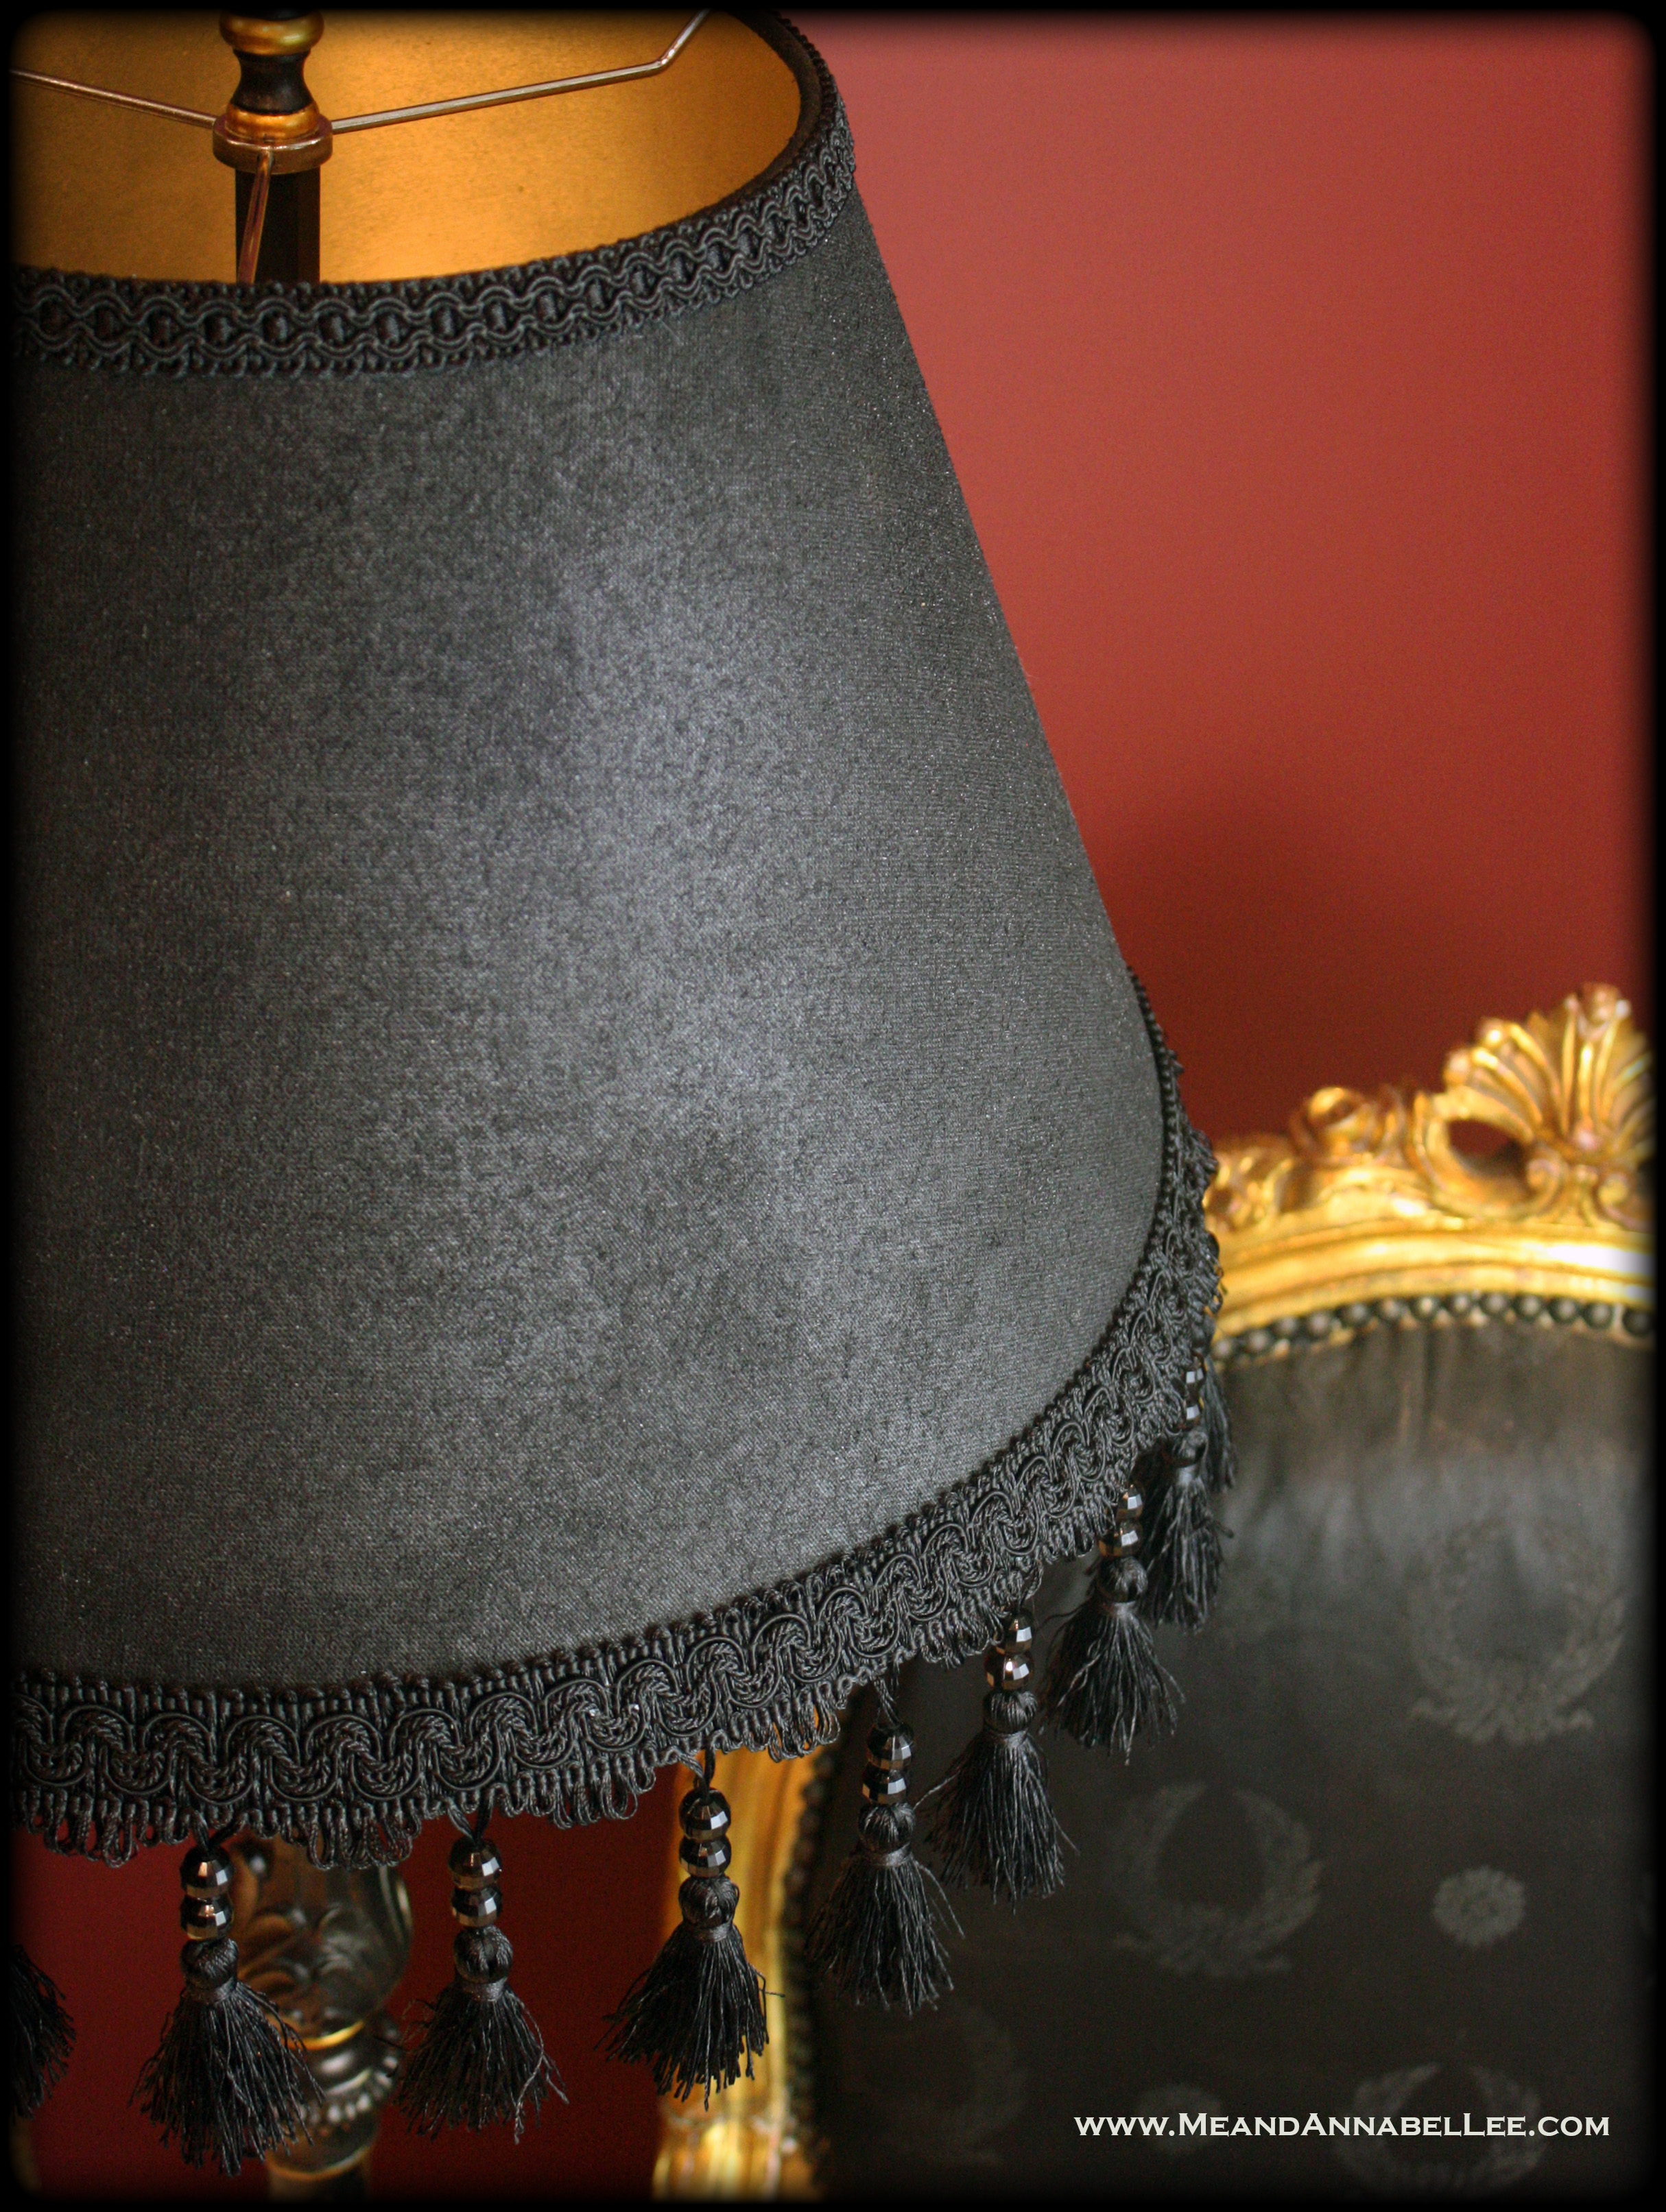 Thrift Store Lamp Shade Makeover | How to Paint a Lamp Shade Black | Goth It yourself | www.MeandAnnabelLee.com